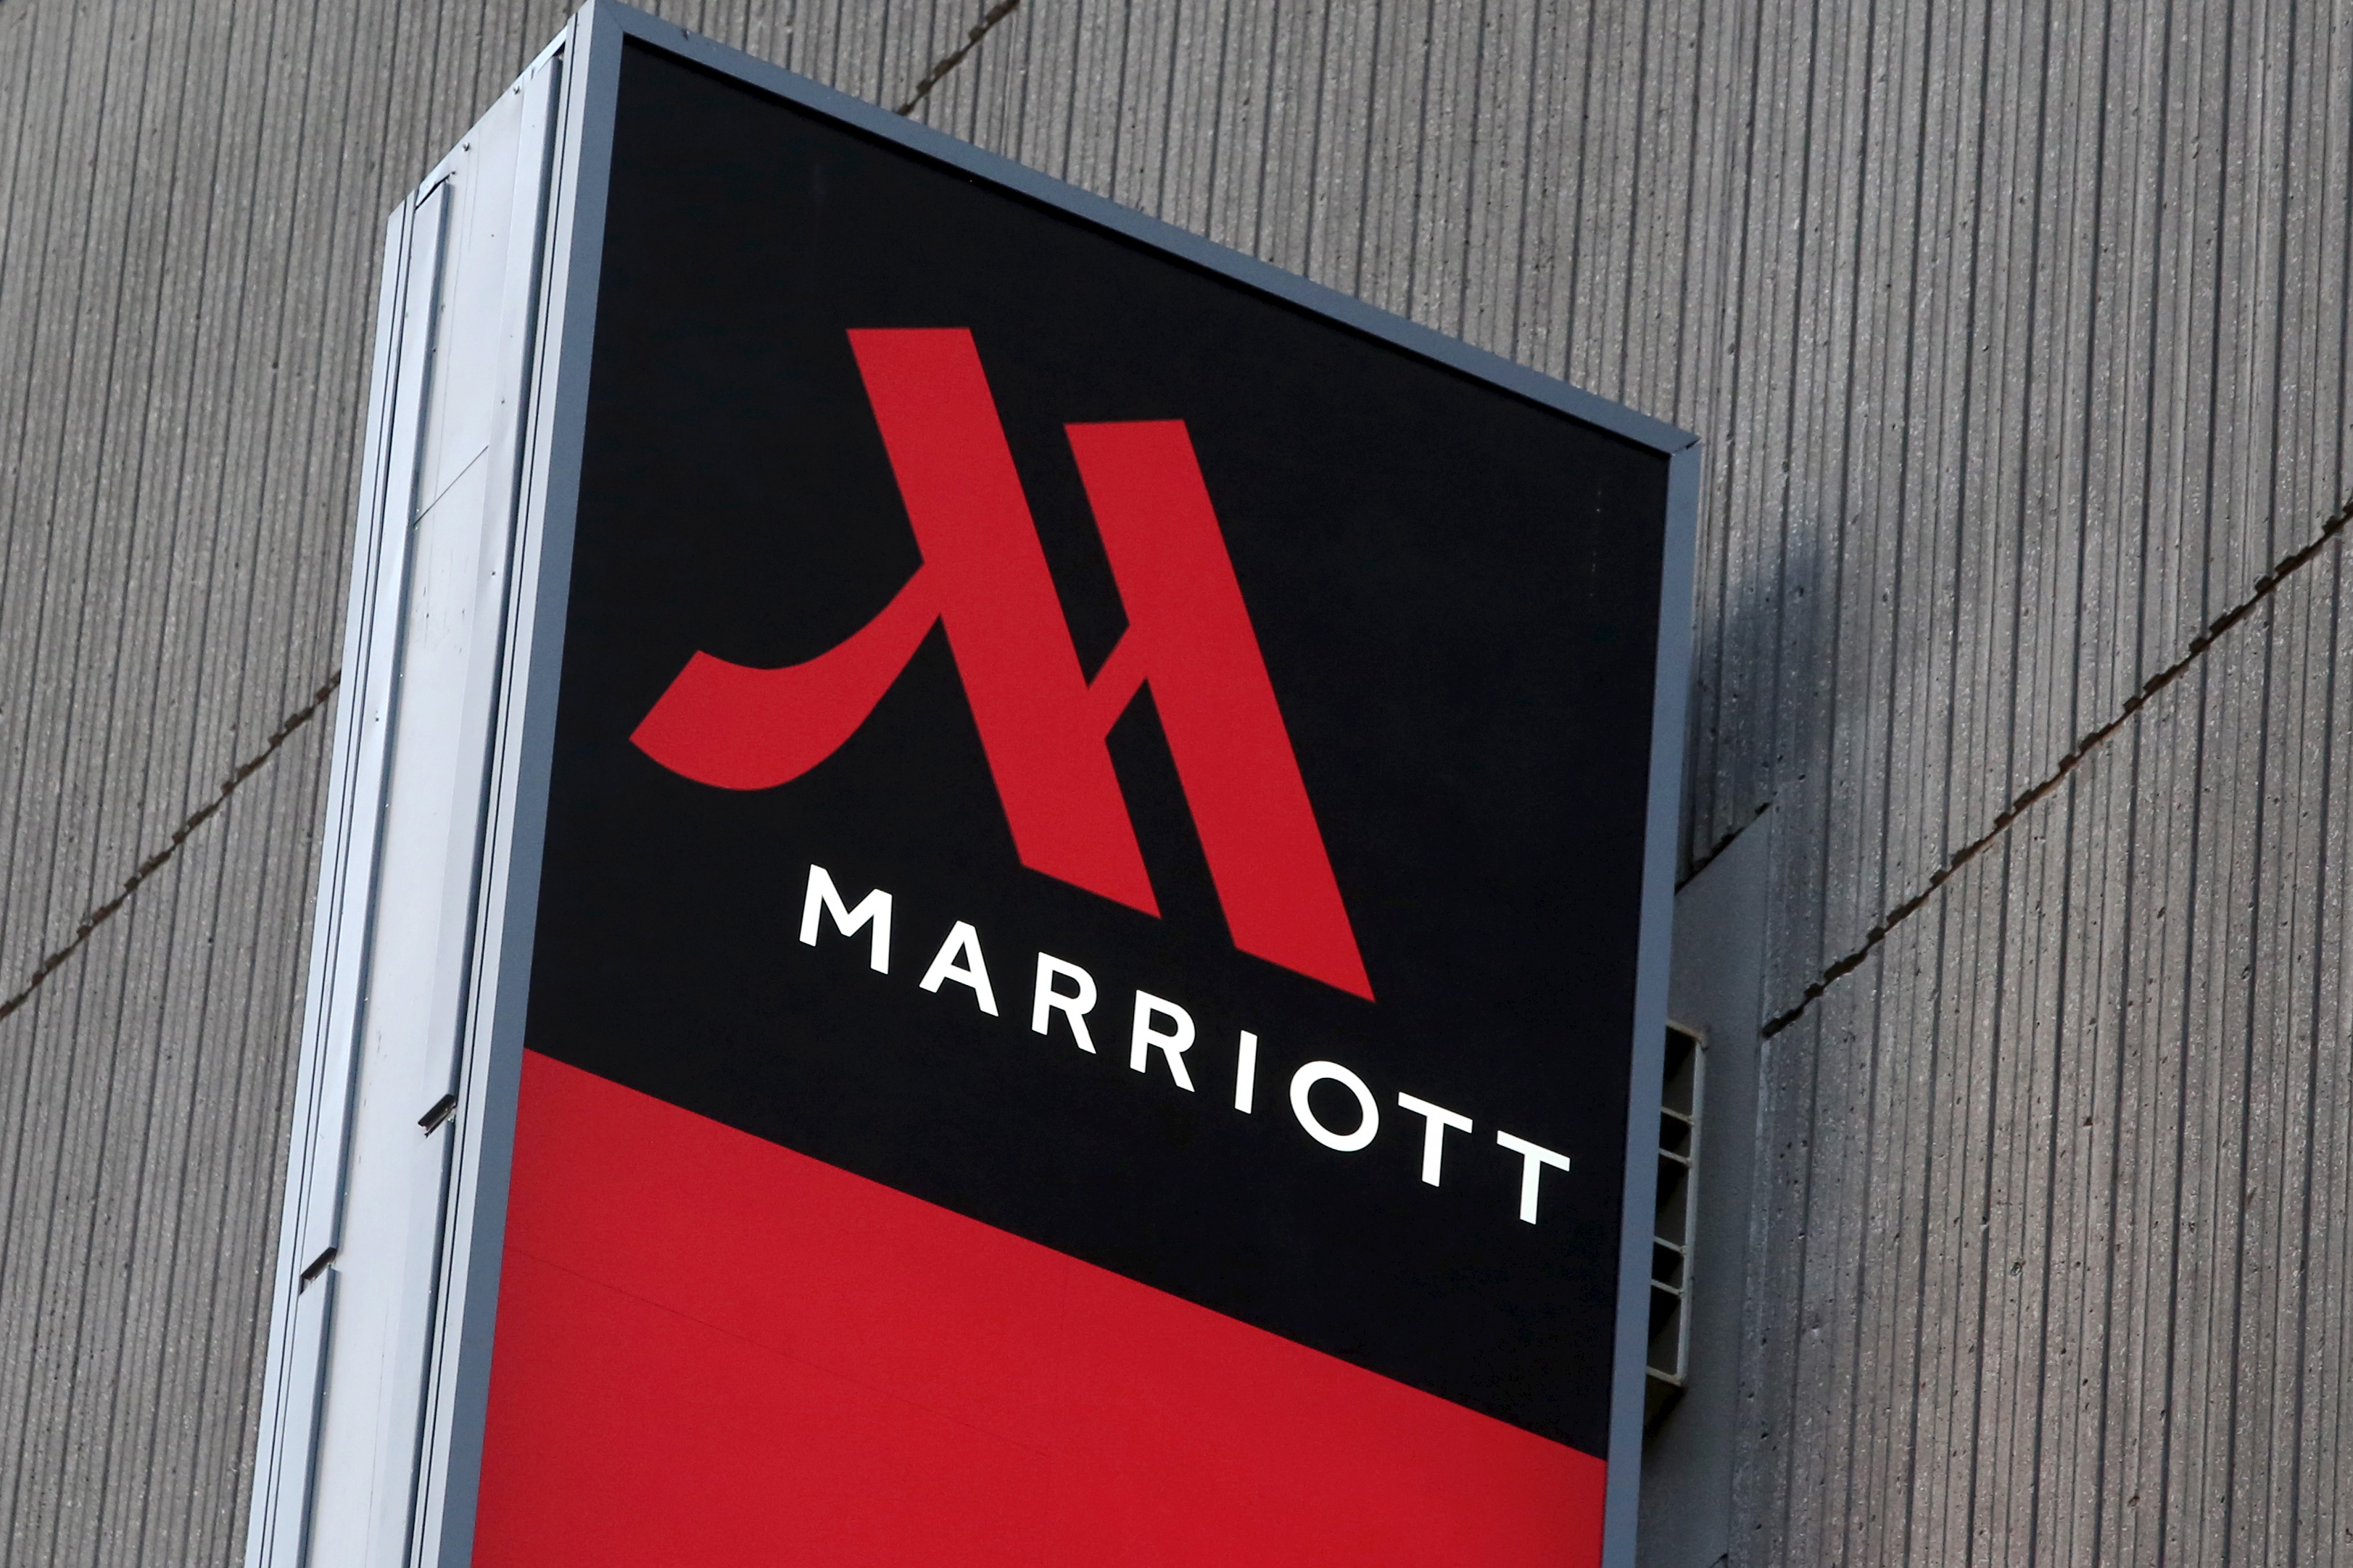 Signage for the New York Marriott Marquis is seen in Manhattan, New York